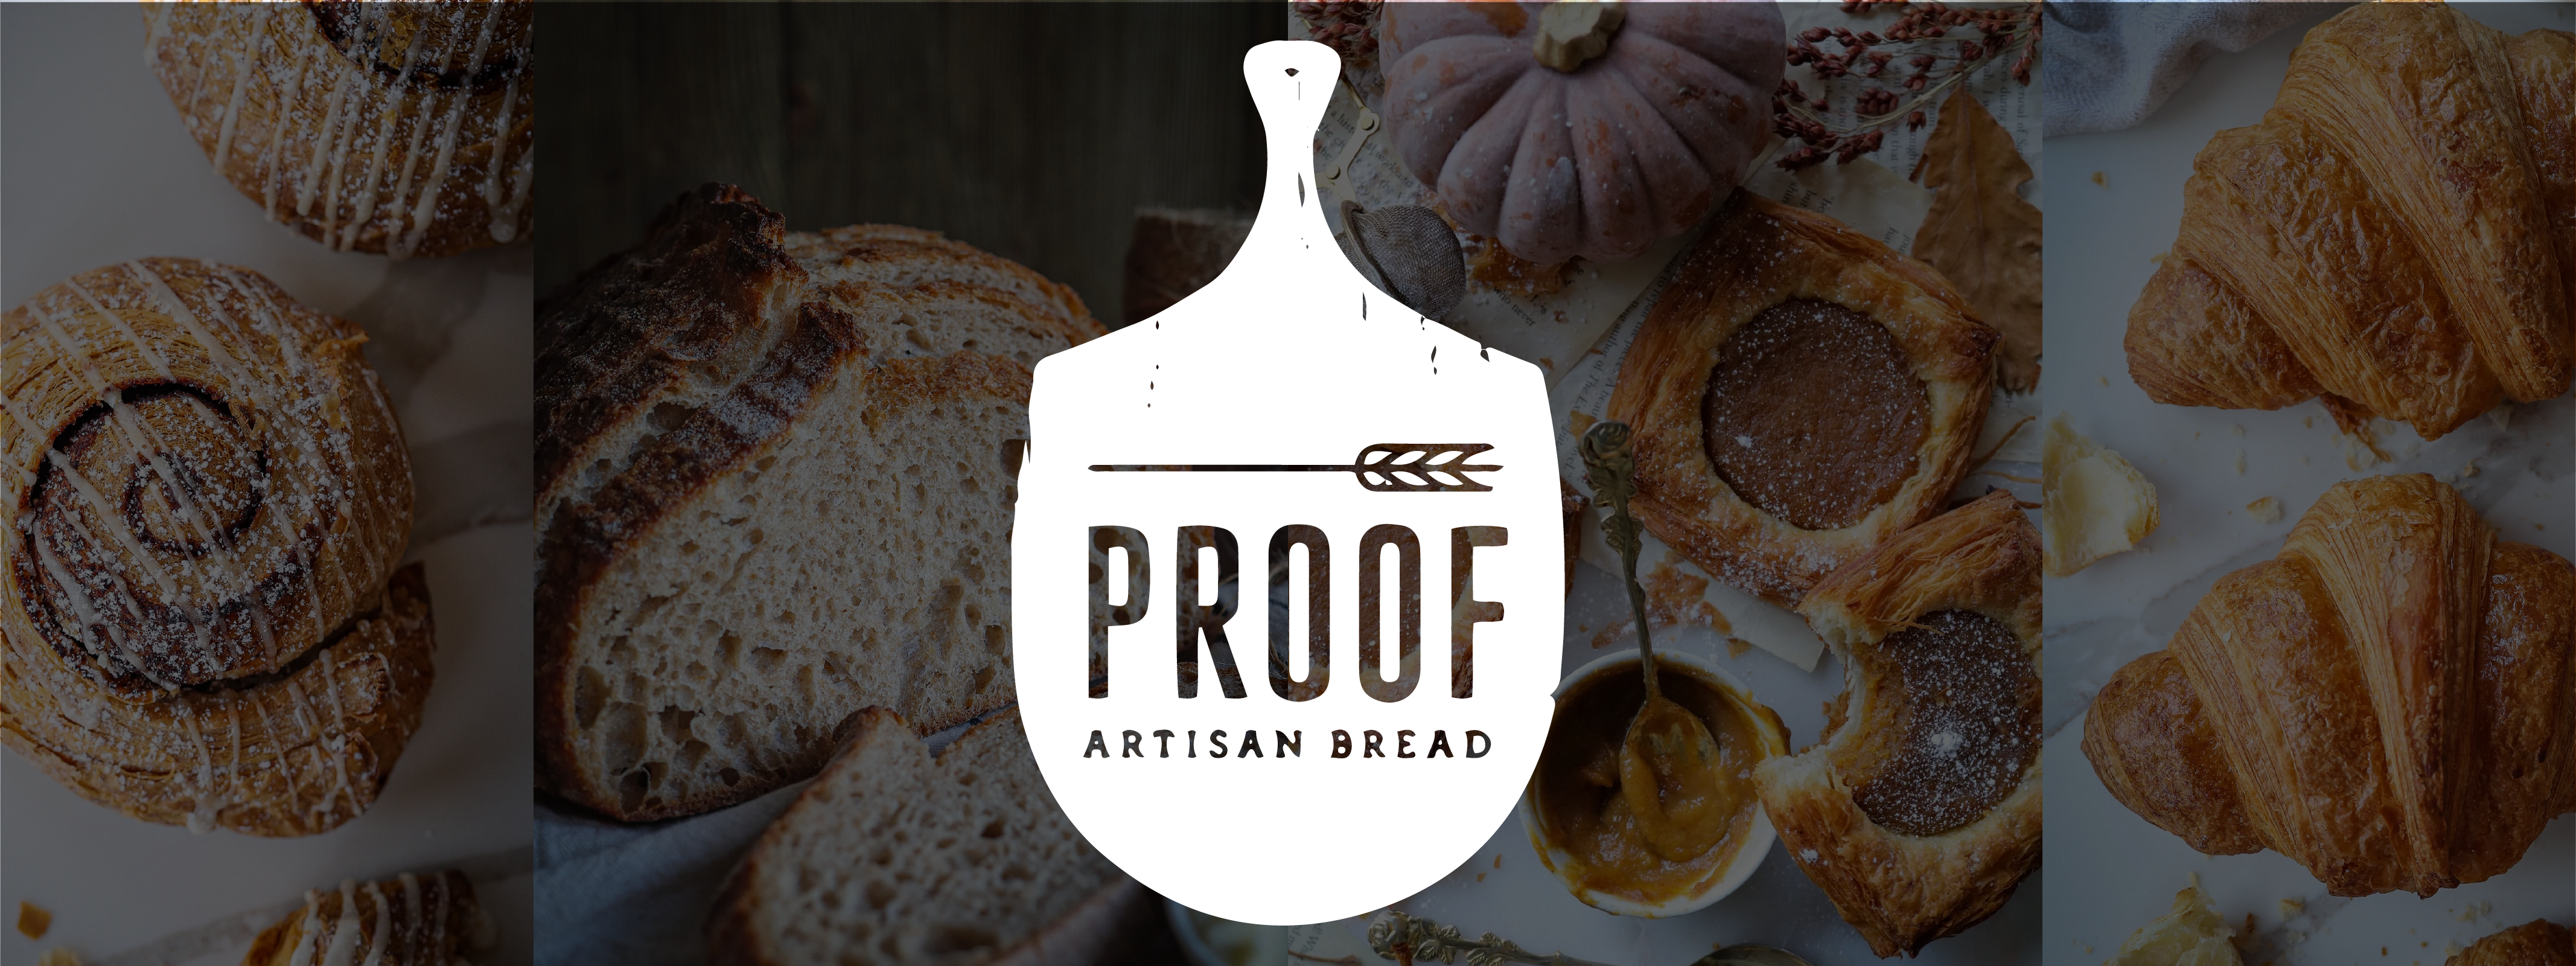 ProofBread-01